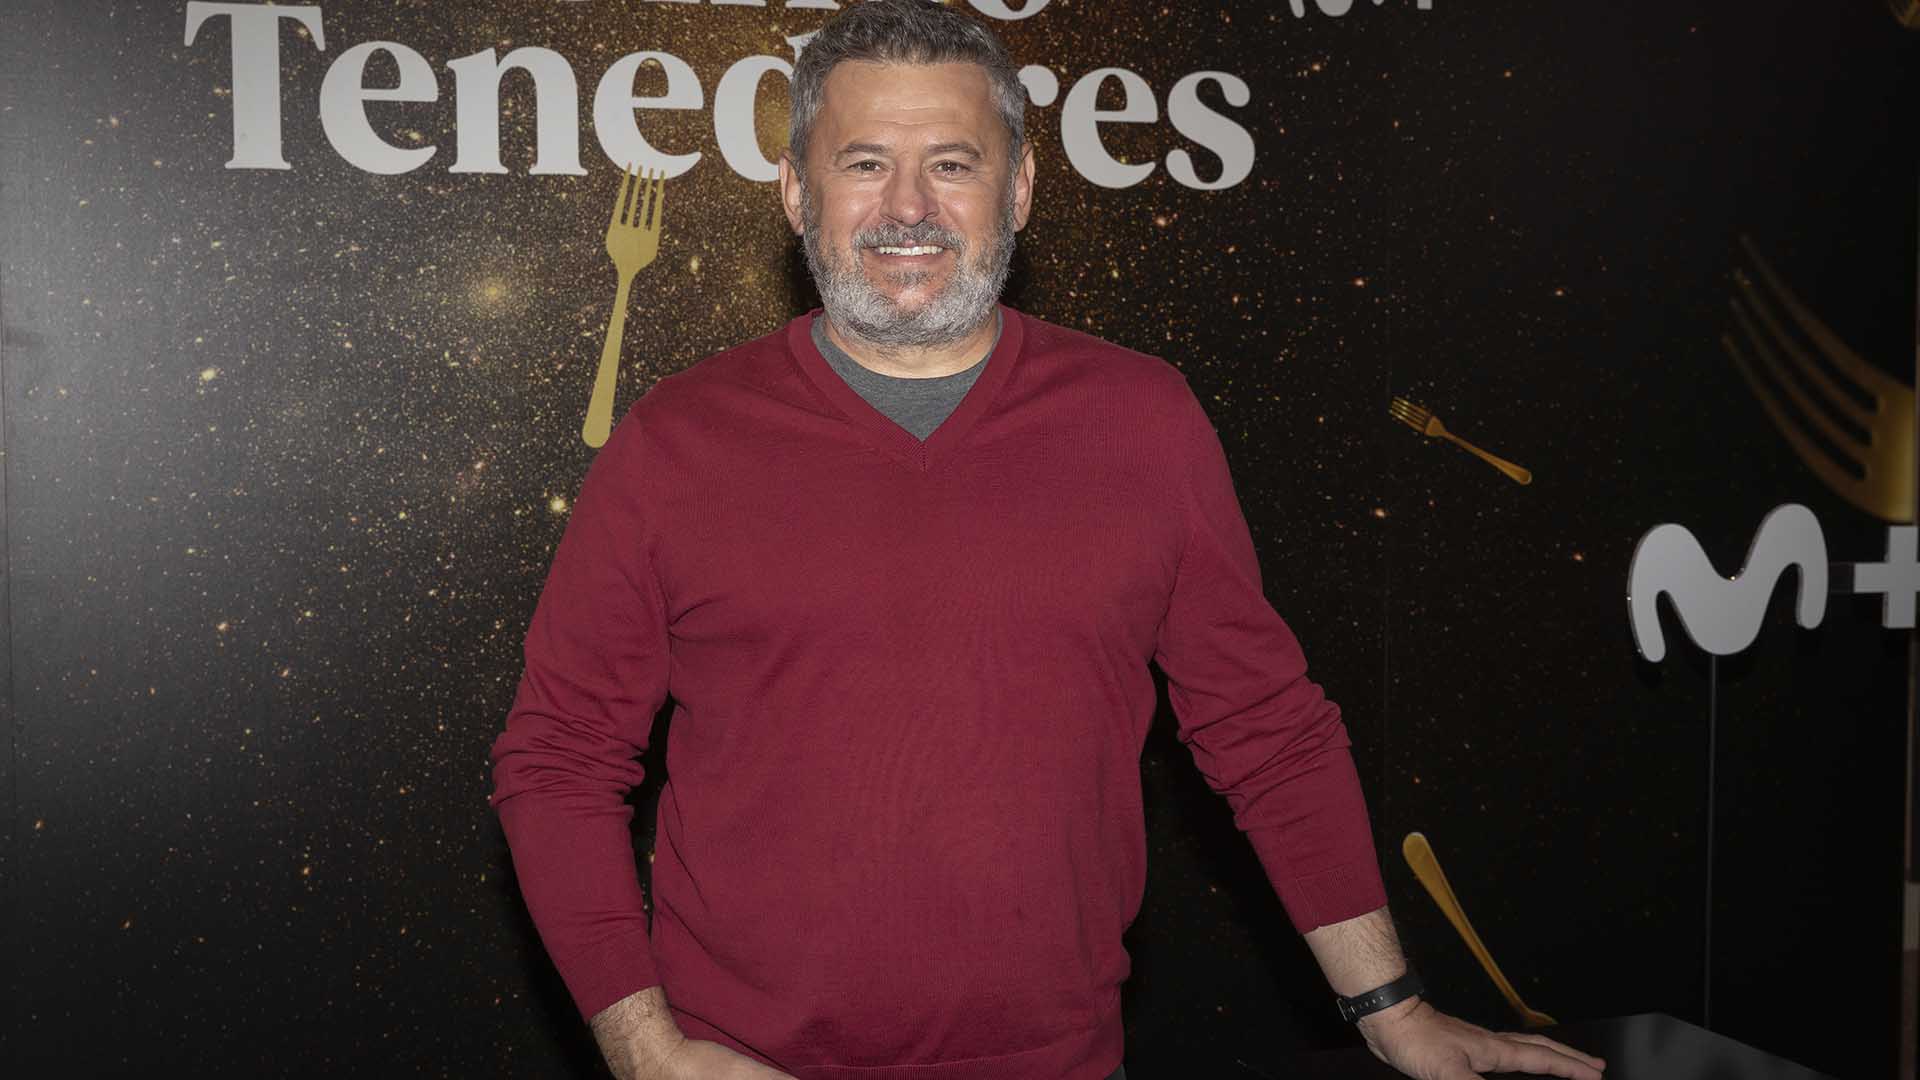 Presenter Miki Nadal at photocall for tv show Cinco Tenedores in Madrid on Tuesday, 15 March 2022.